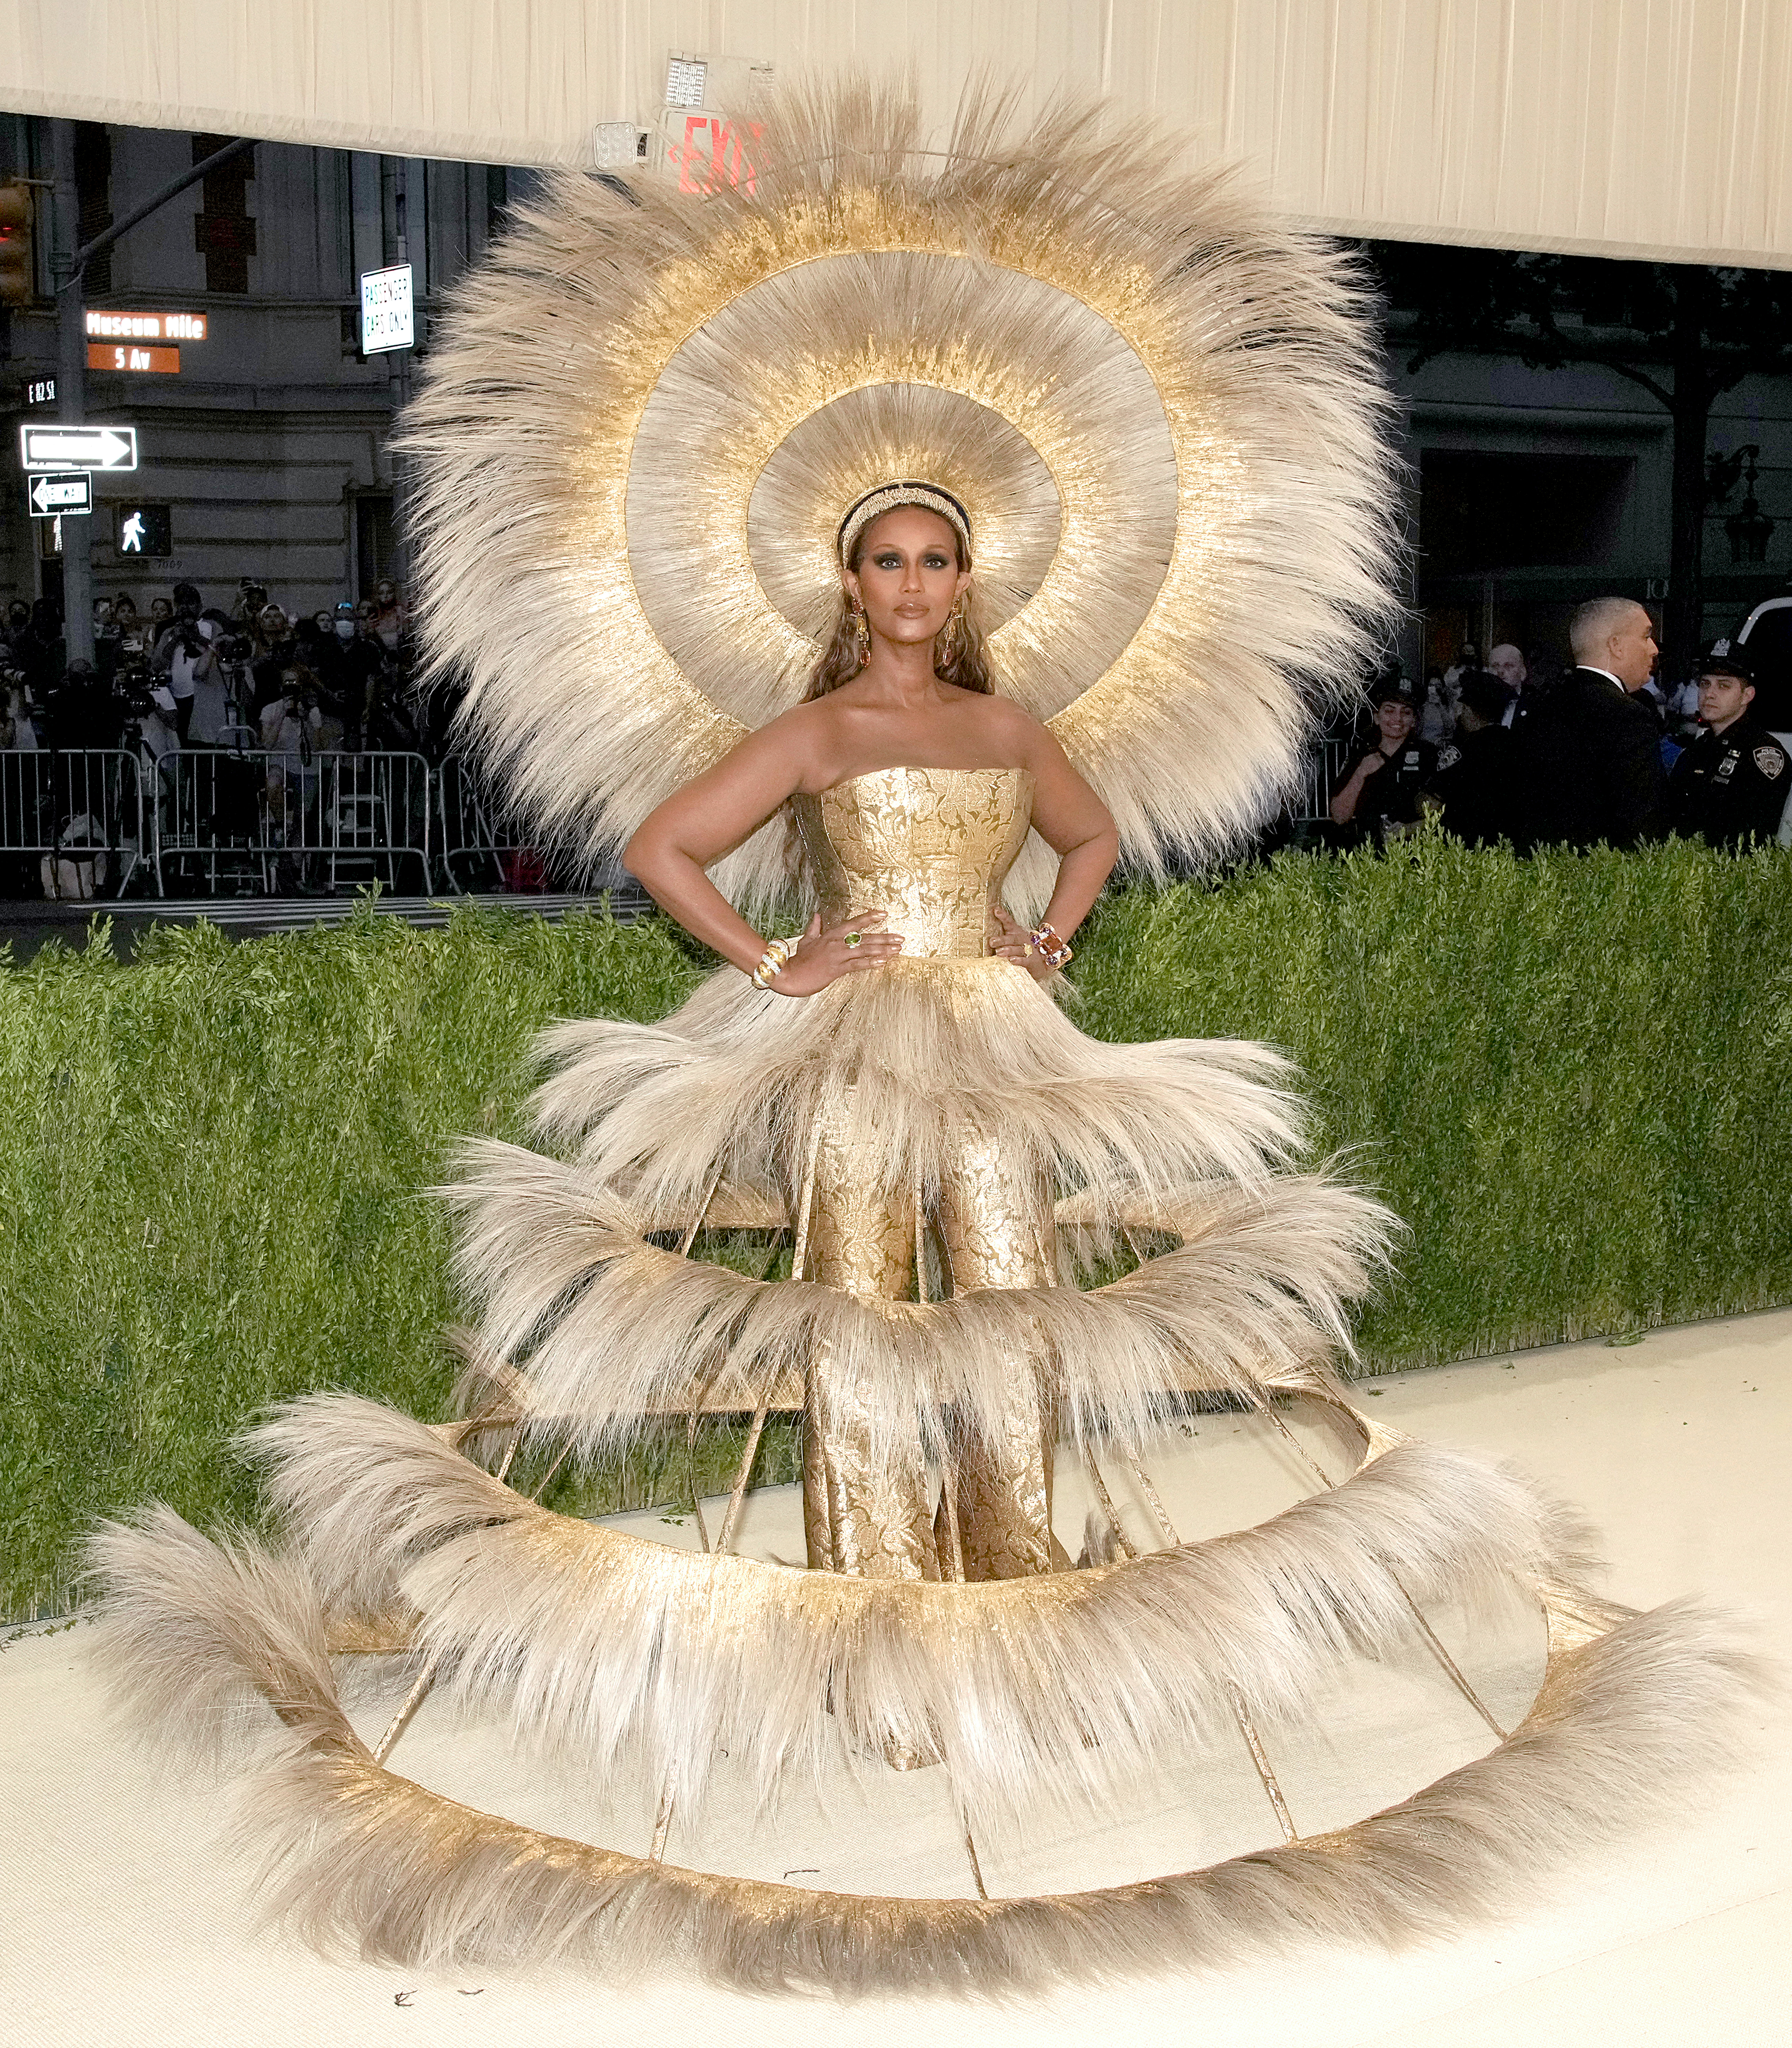 Iman at the 2021 Met Gala celebrating "In America: A Lexicon Of Fashion" on September 13, 2021, in New York. | Source: Getty Images